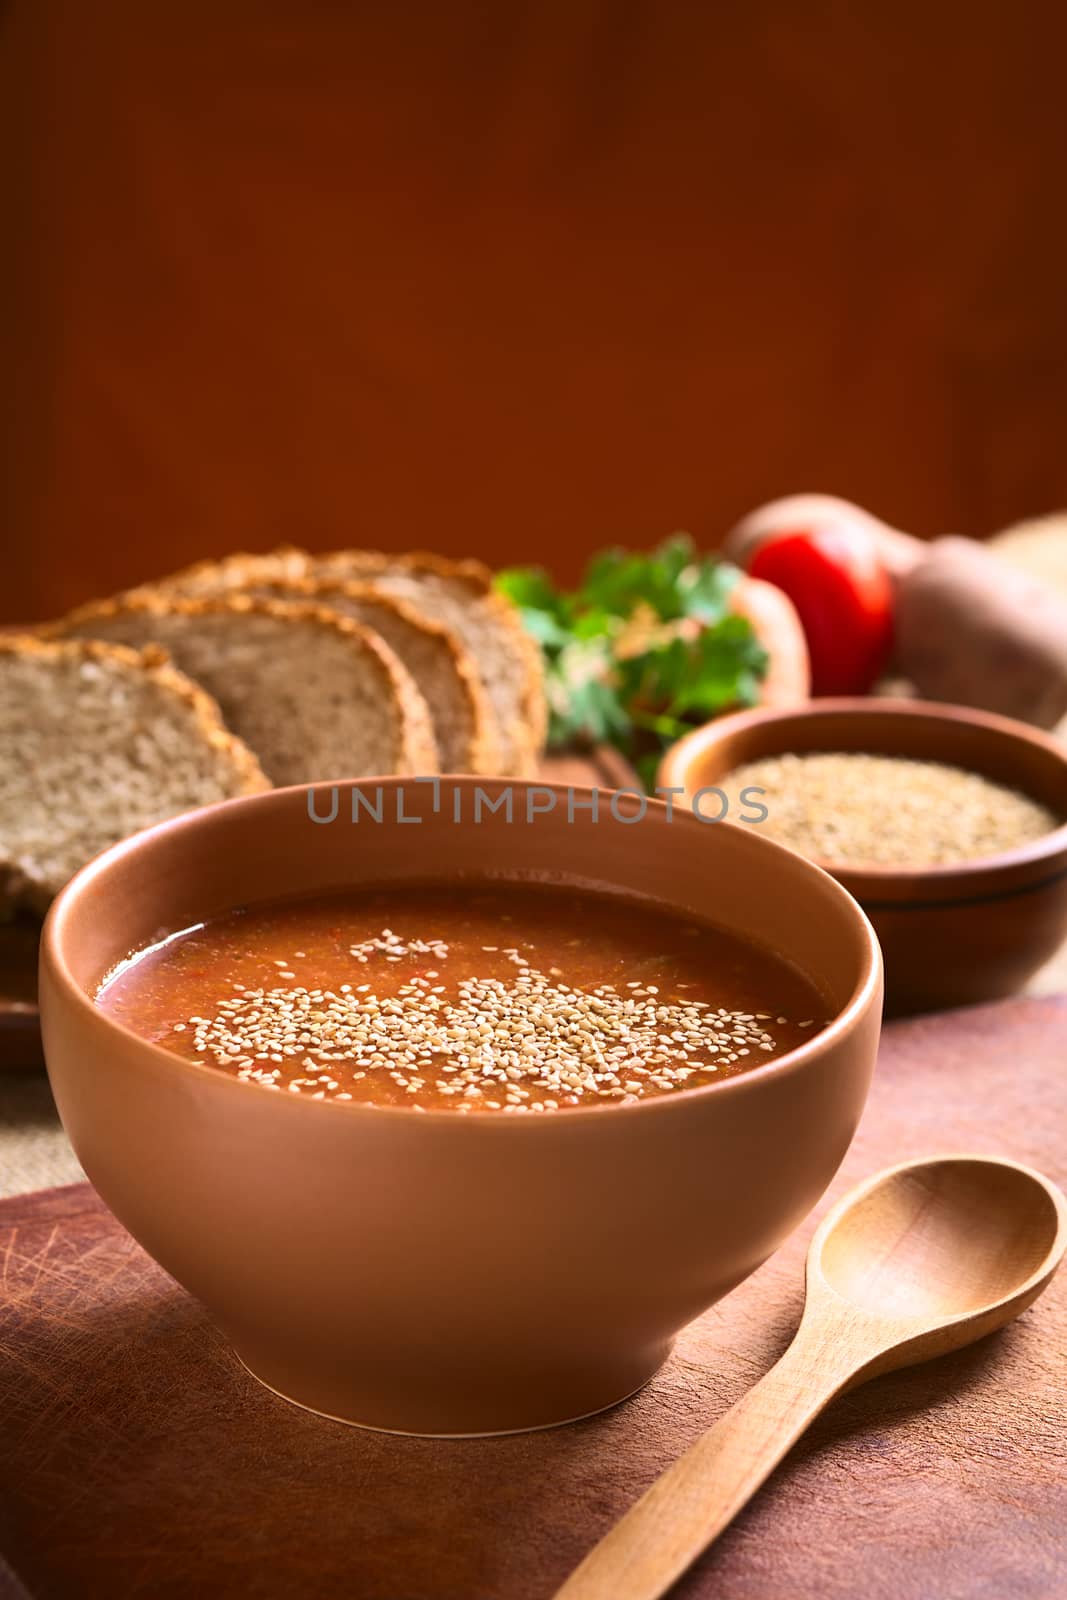 Cream of vegatable soup made of tomato, carrot, potato and parsley served in bowl and sprinkled with sesame seeds, photographed with natural light (Selective Focus, Focus in the middle of the soup)